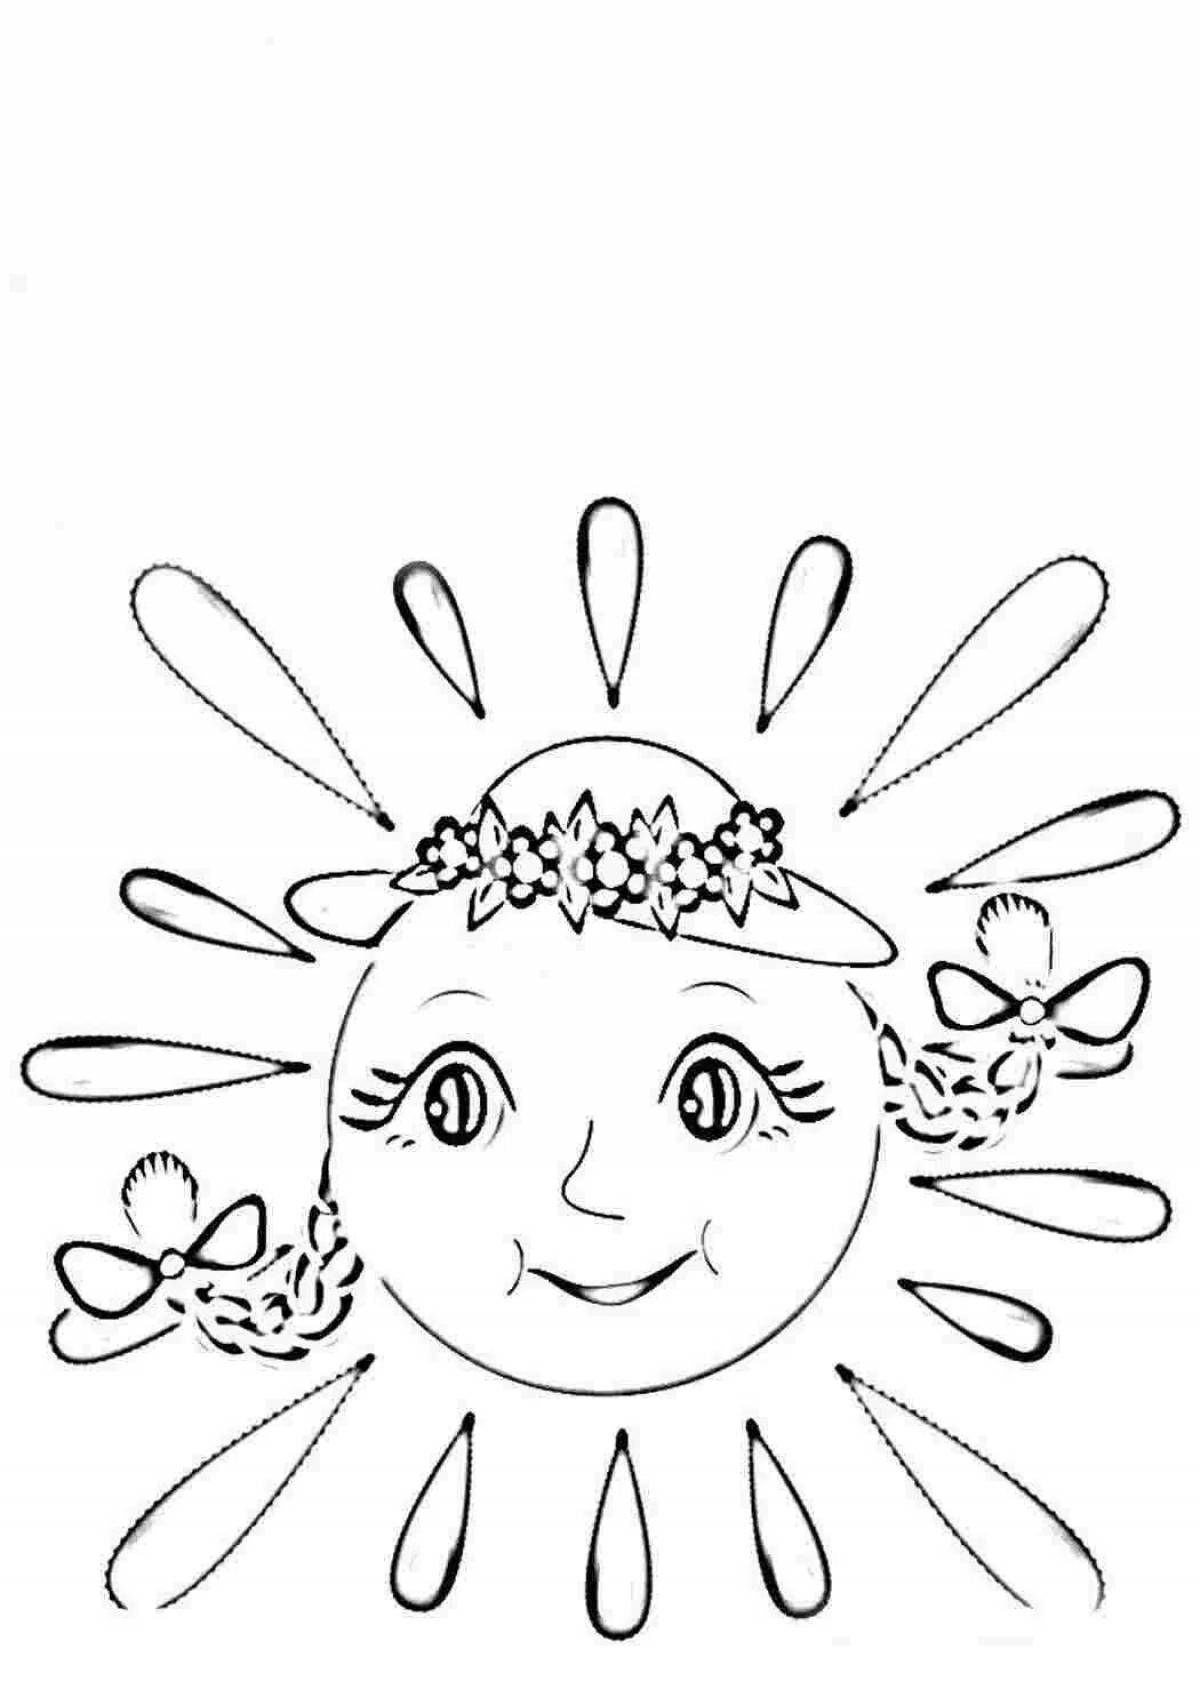 Fun kun coloring page for kids